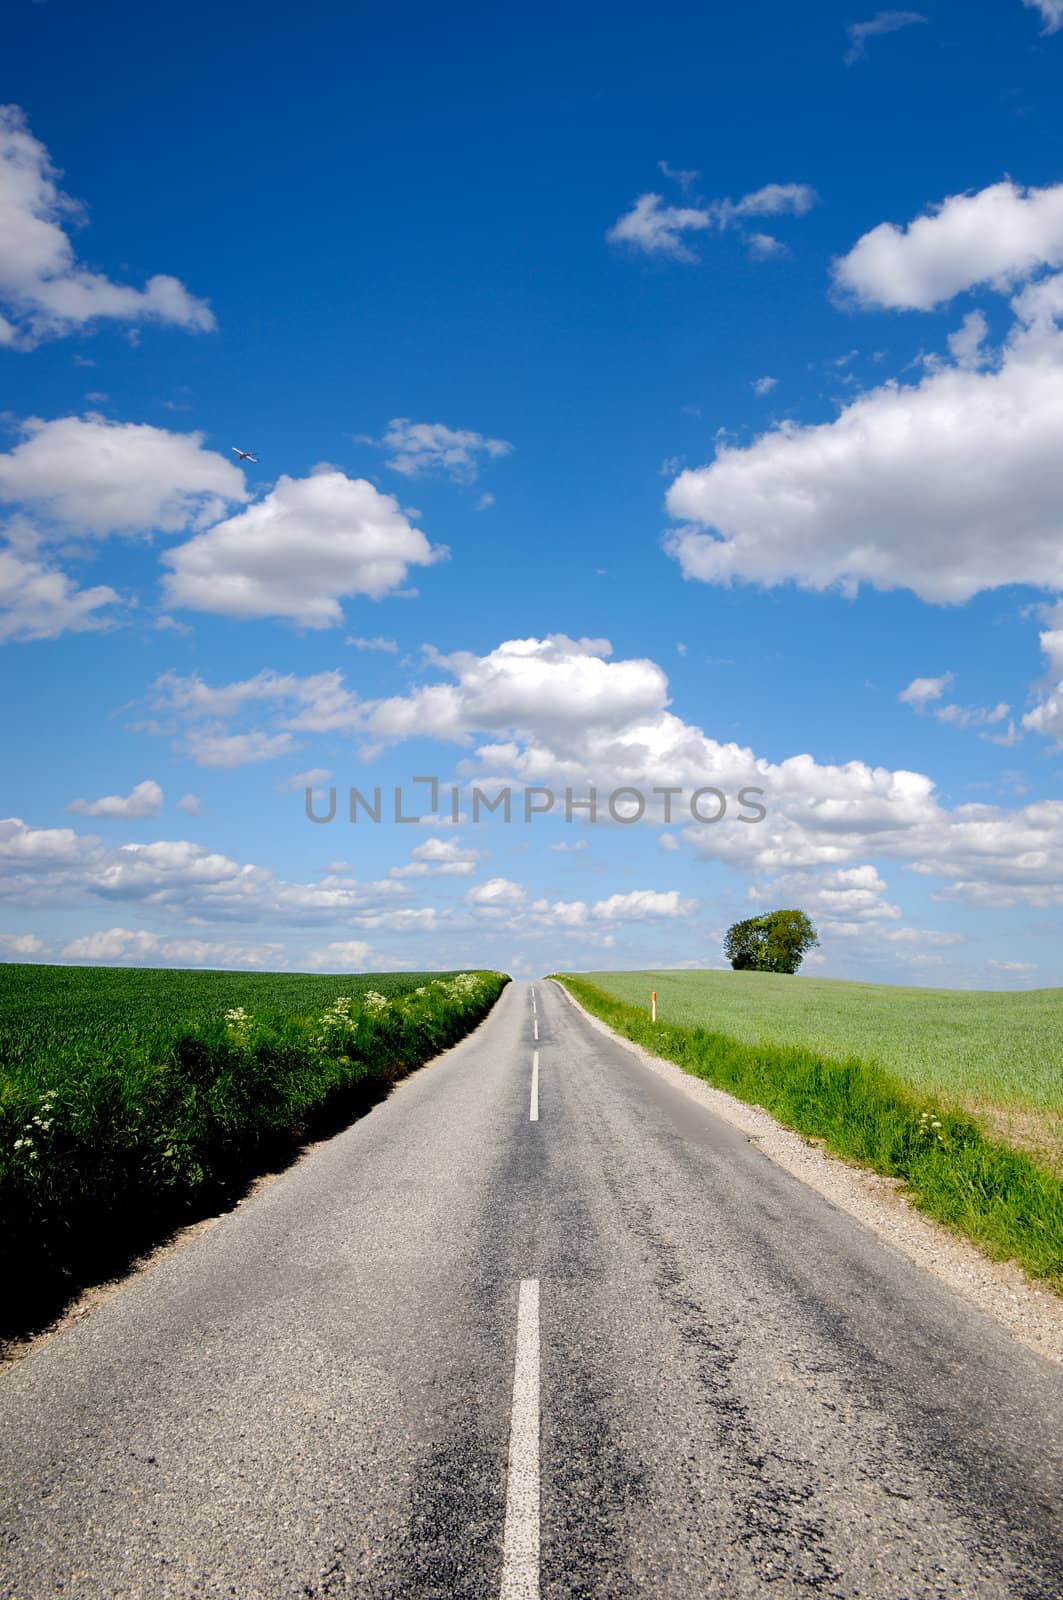 Road with surrounding green fields. The sky is blue with white clouds